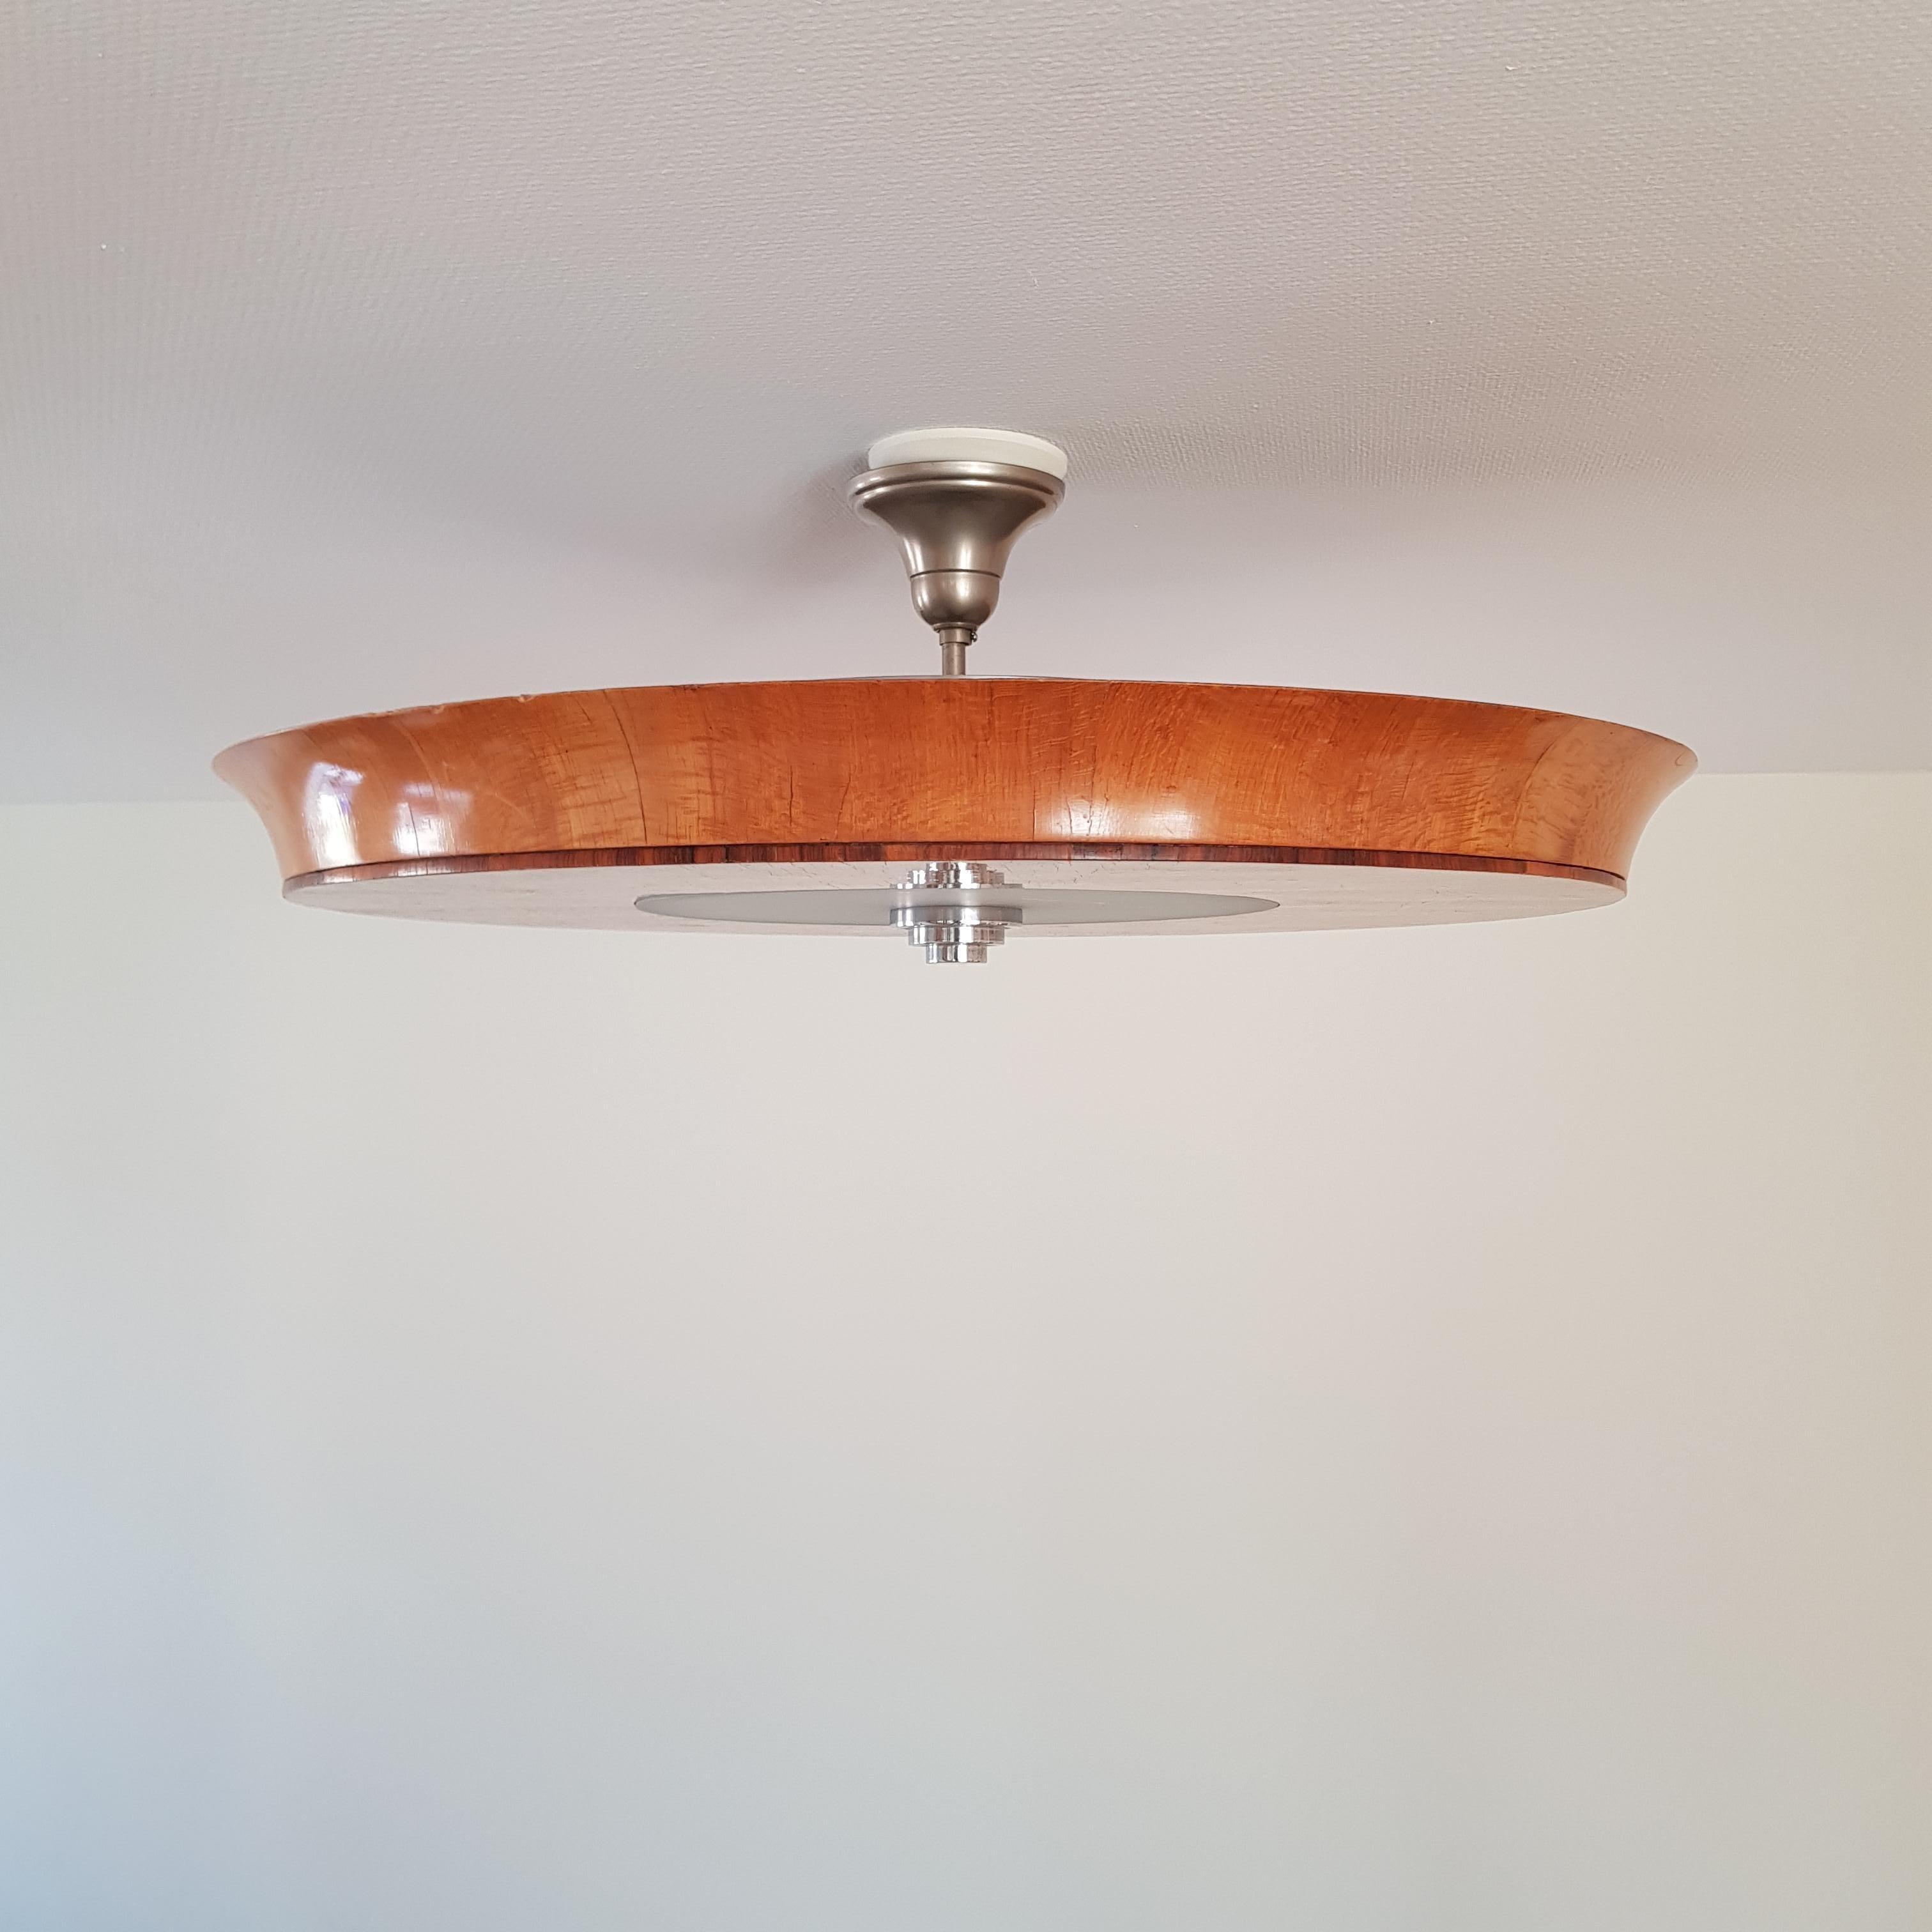 Elegant Swedish Grace / Art Deco hanging flush mount ceiling lamp from the 1930s. Most likely designed by Birger Ekman for Mjölby Intarsia. The piece features an intricatefloral inlay along the face with an unusual rounded beveling at rim. Incised